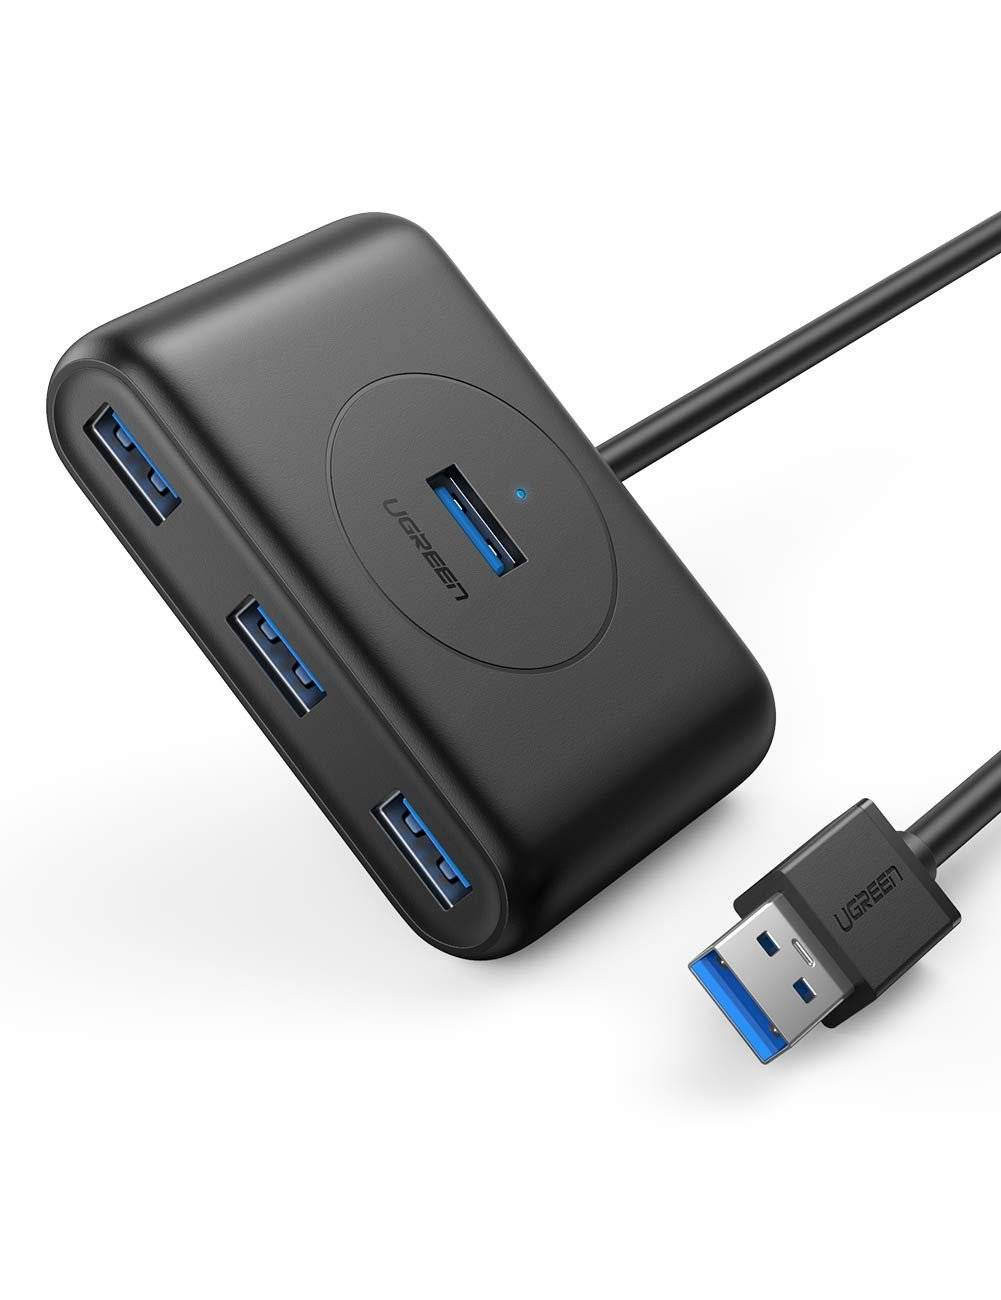 Anker 4-Port USB 3.0 Hub, Ultra-Slim Data USB Hub with 2 ft Extended Cable  [Charging Not Supported], for MacBook, Mac Pro, Mac mini, iMac, Surface